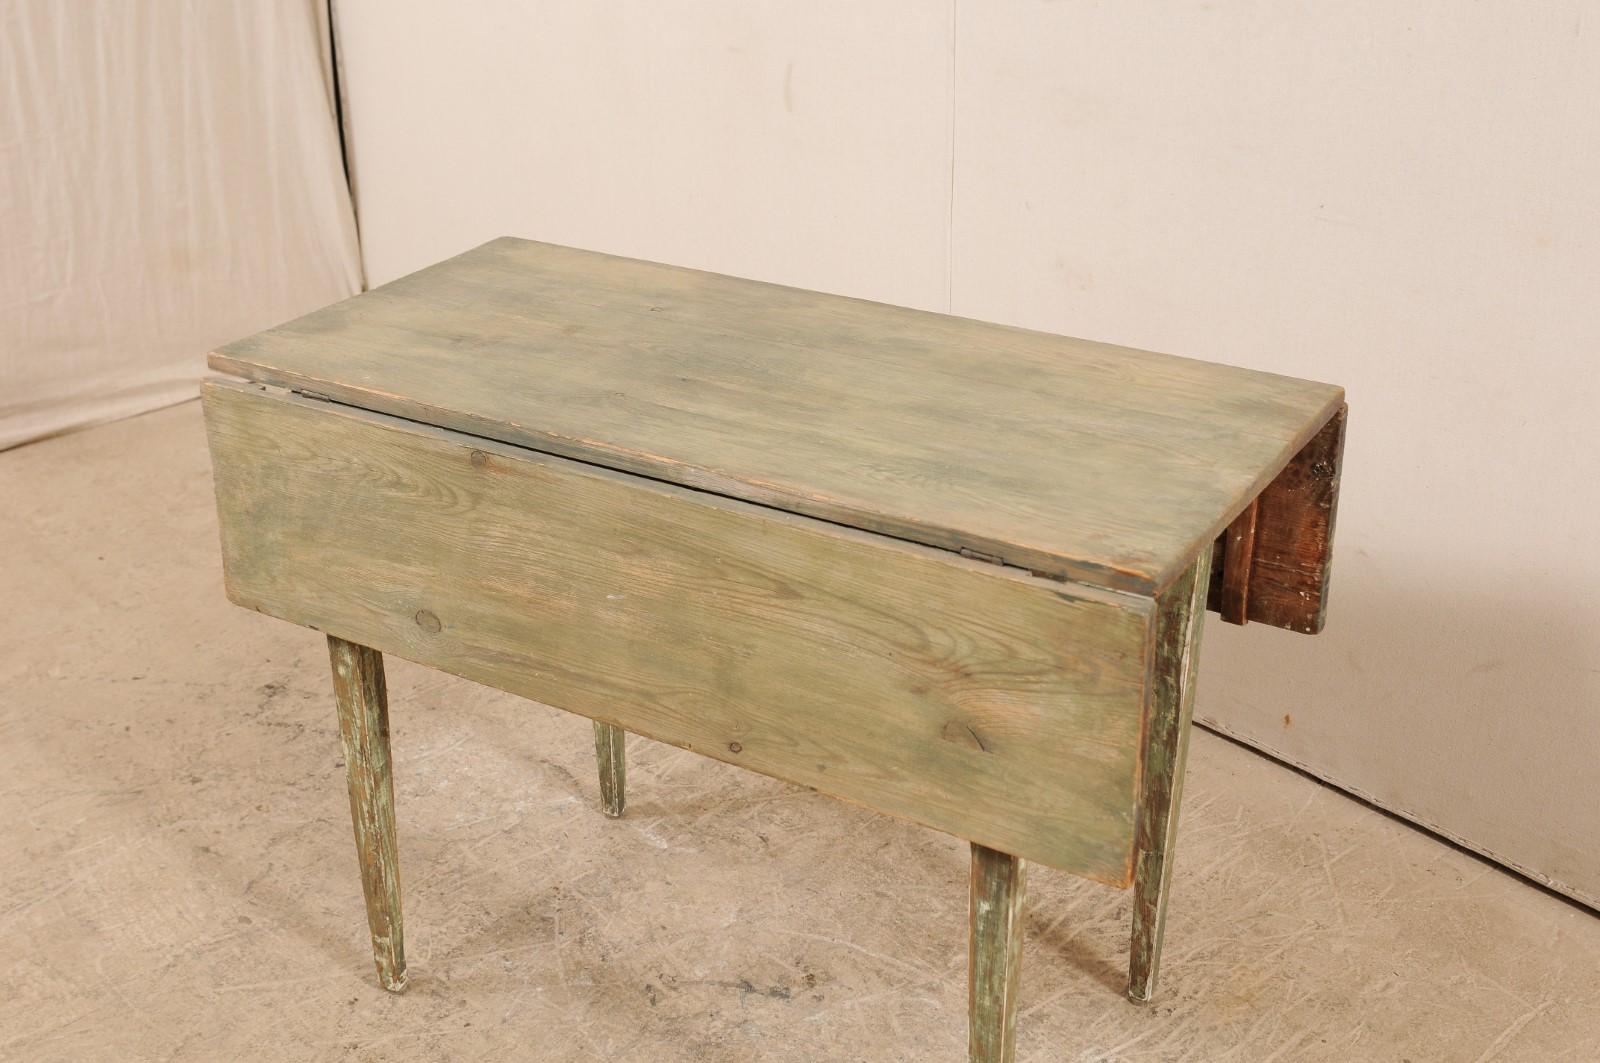 19th Century Swedish Painted Wood Drop-Leaf Table with Original Paint (Schwedisch)